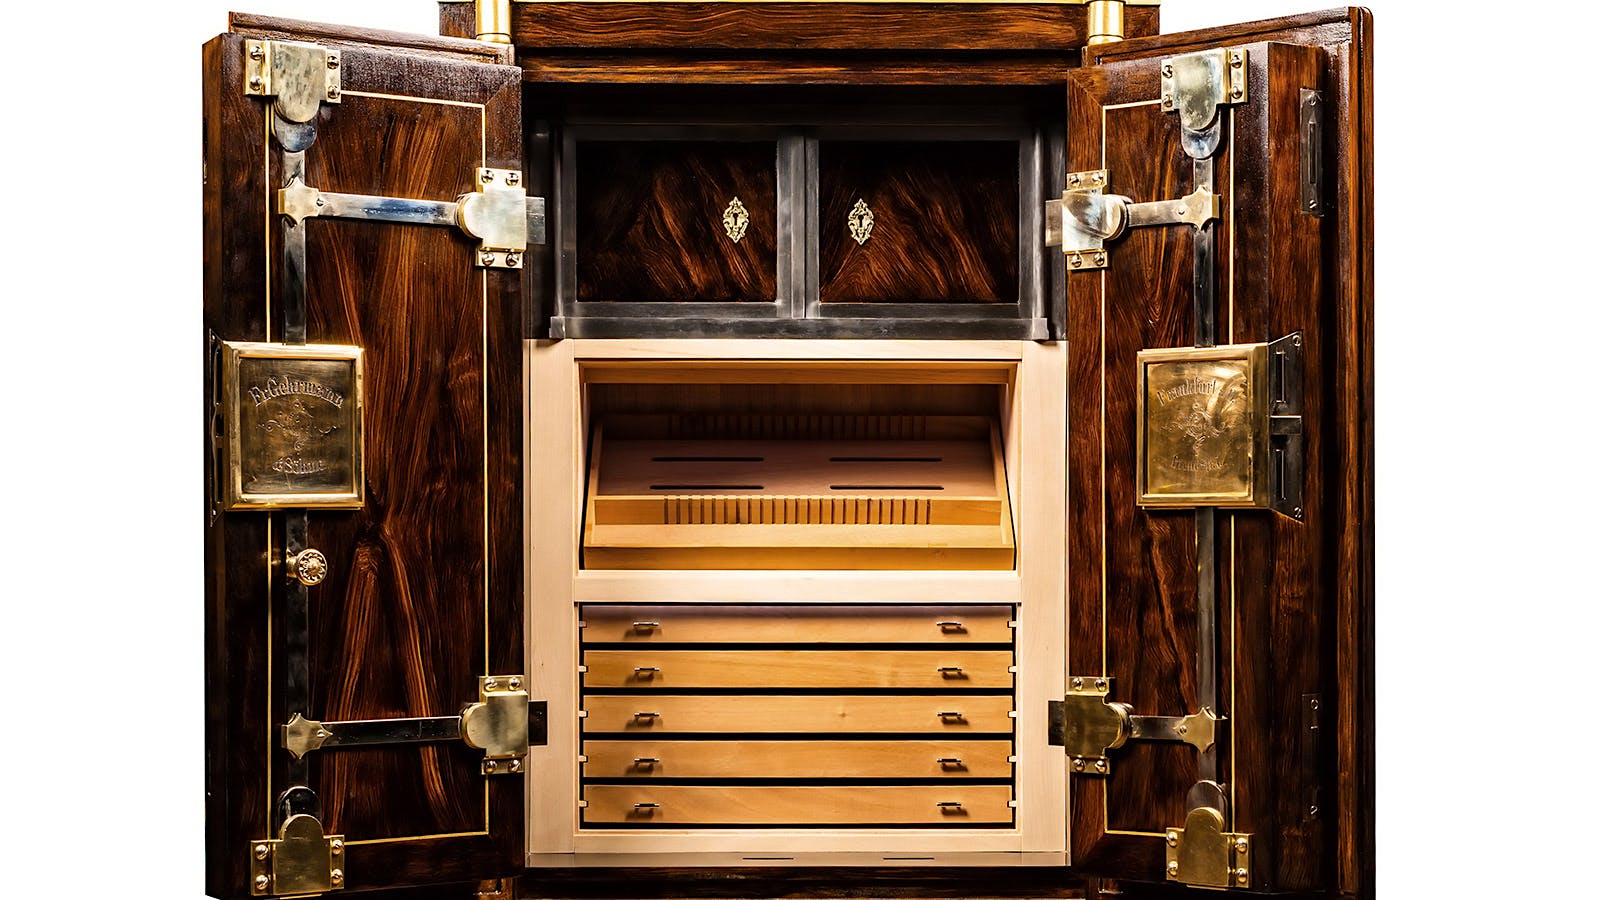 The cedar-lined cabinet, which consists of five drawers and one tray, holds up to 1,000 cigars.